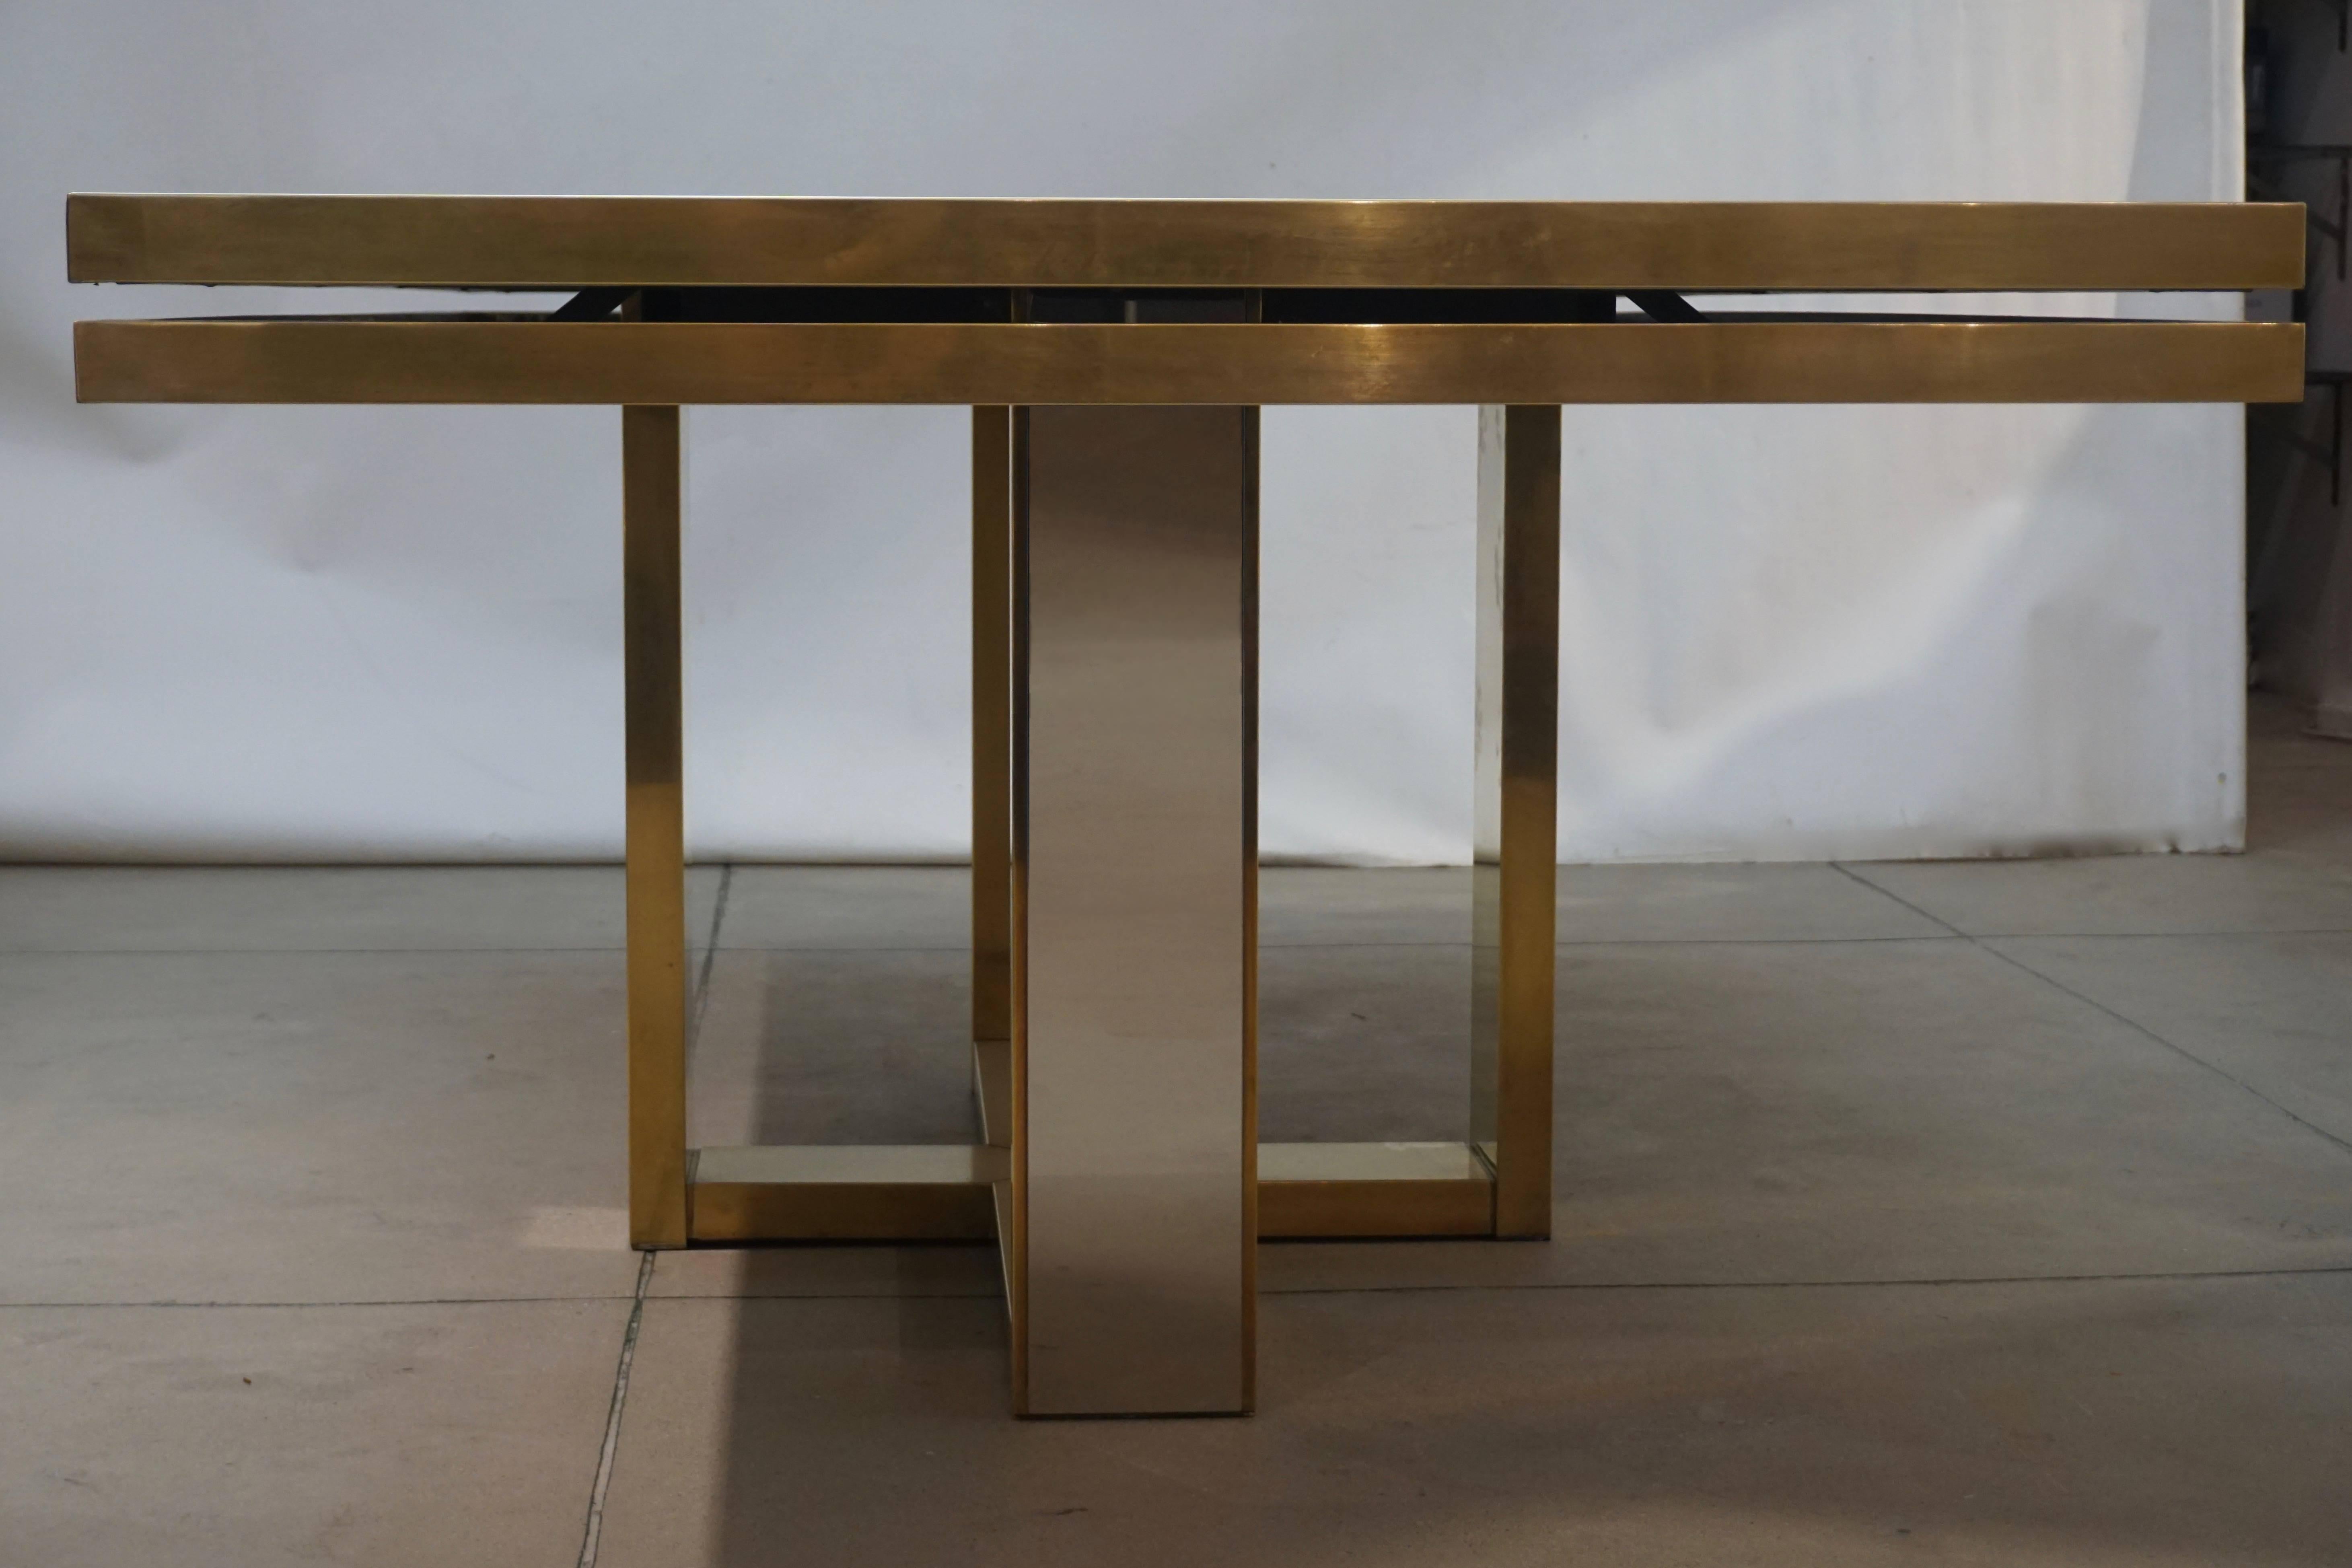 Vintage one of a kind Italian large dining, conference or hall table, exclusive sleek linear design by Giacomo Sinopoli, made by Liwan's, a Roman manufacturer, as described in the documentation. The brass double-frame top is decorated with a